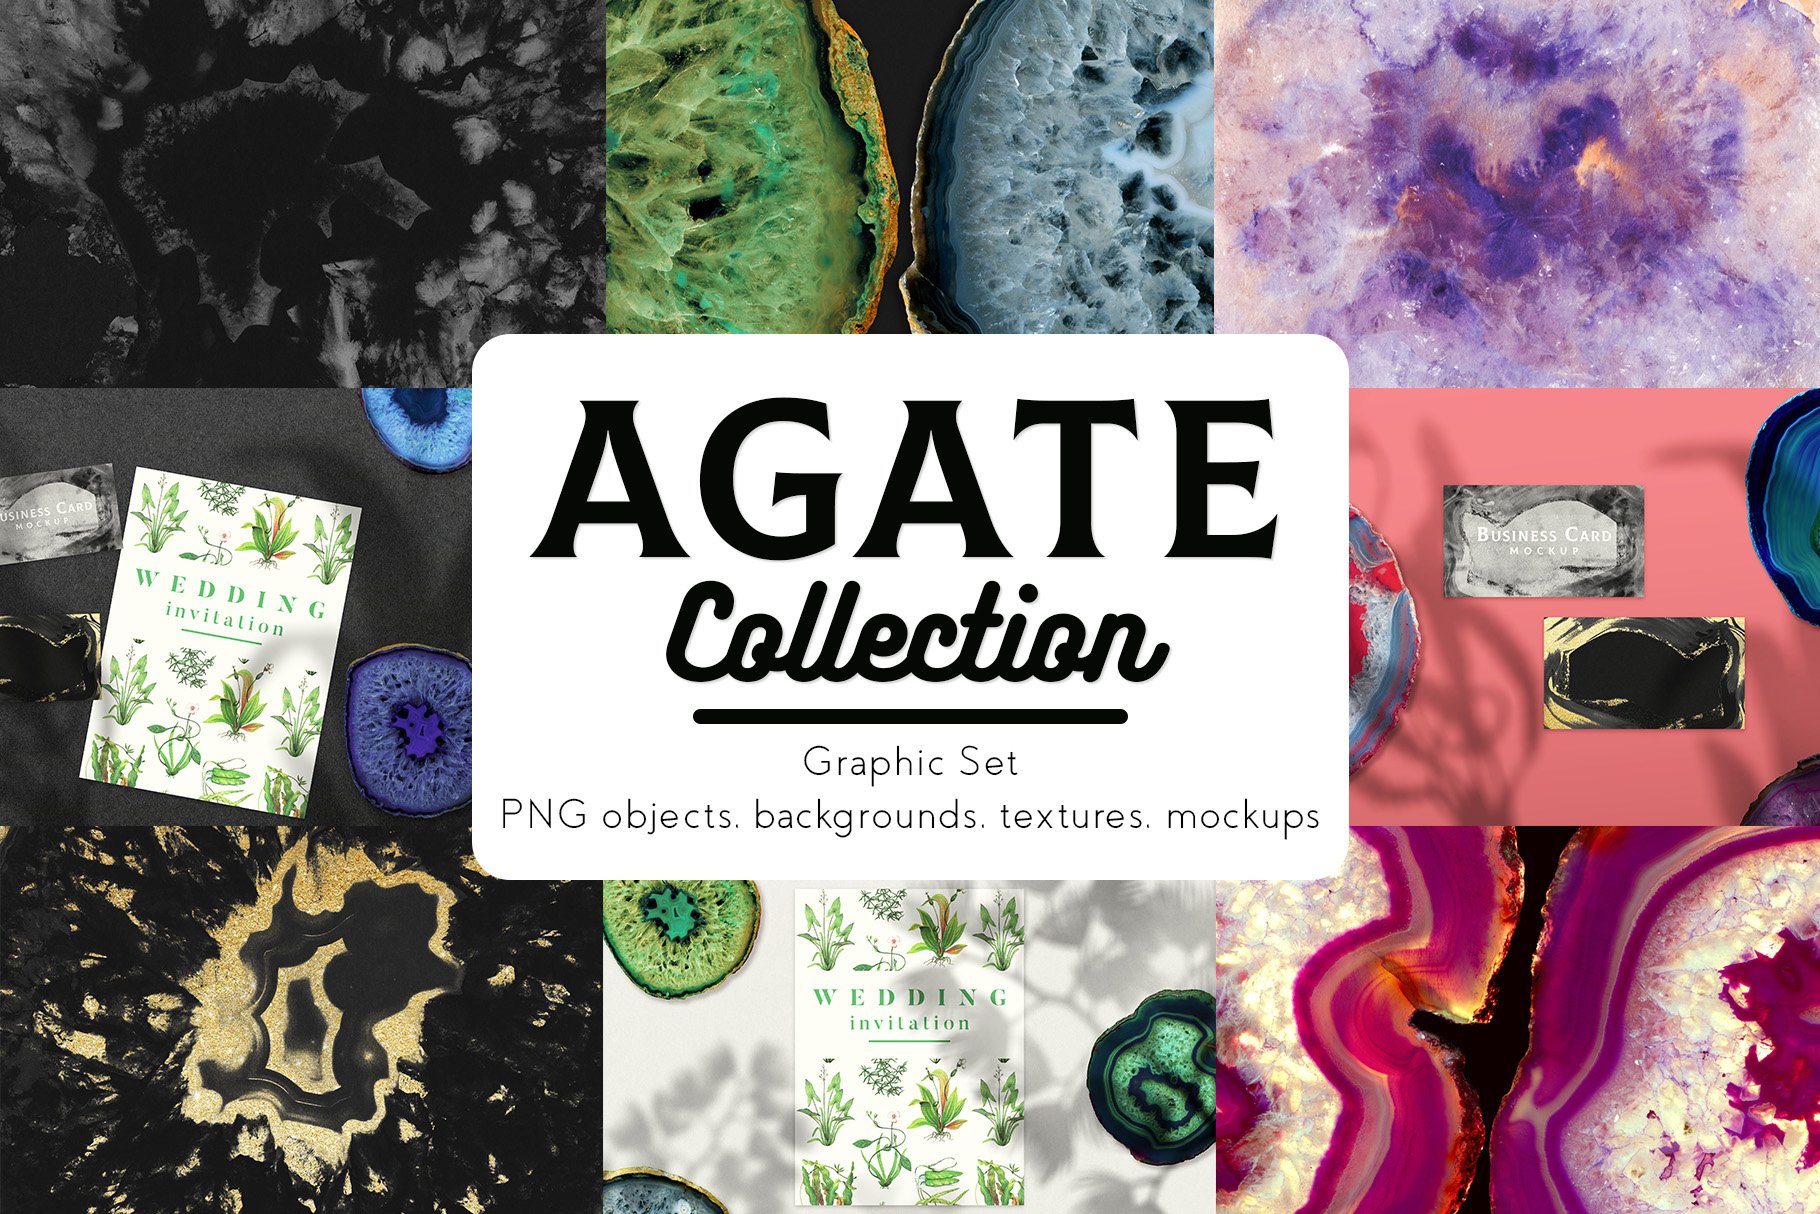 Agata collection for your project.